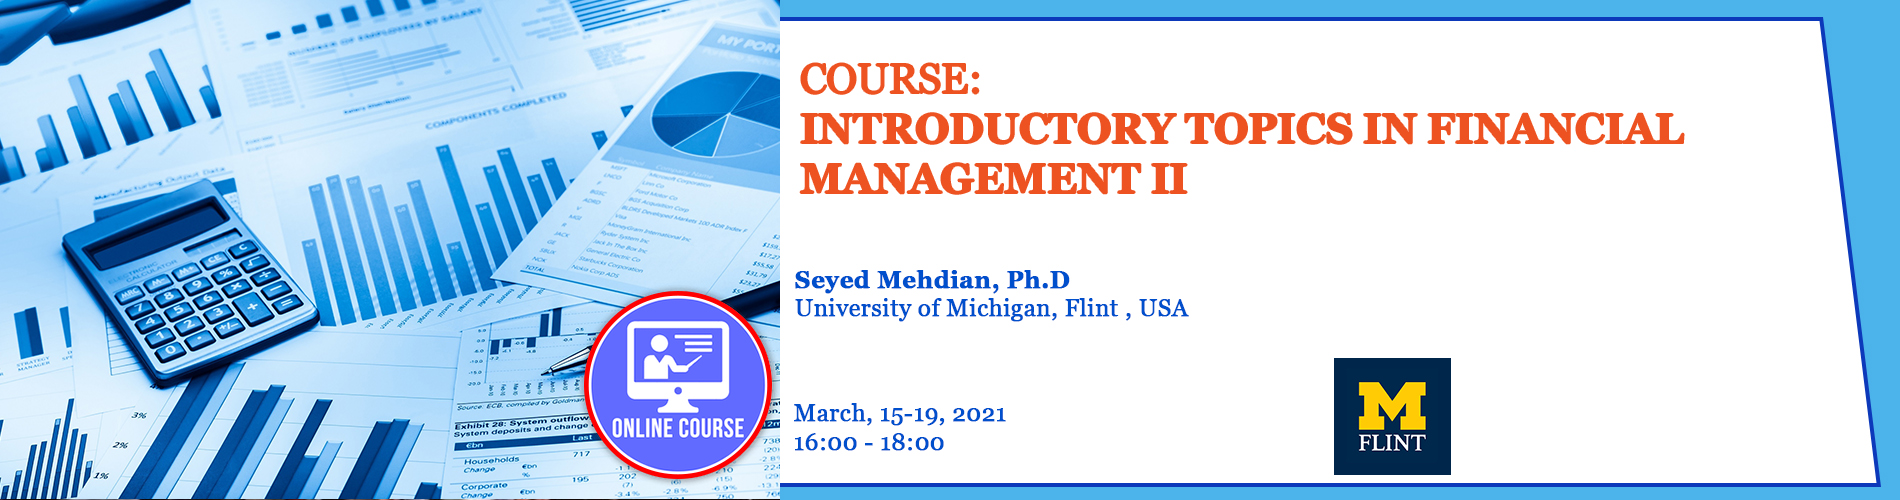 2021.03.15- 2021.03.19 - Introductory Topics in Financial Management II